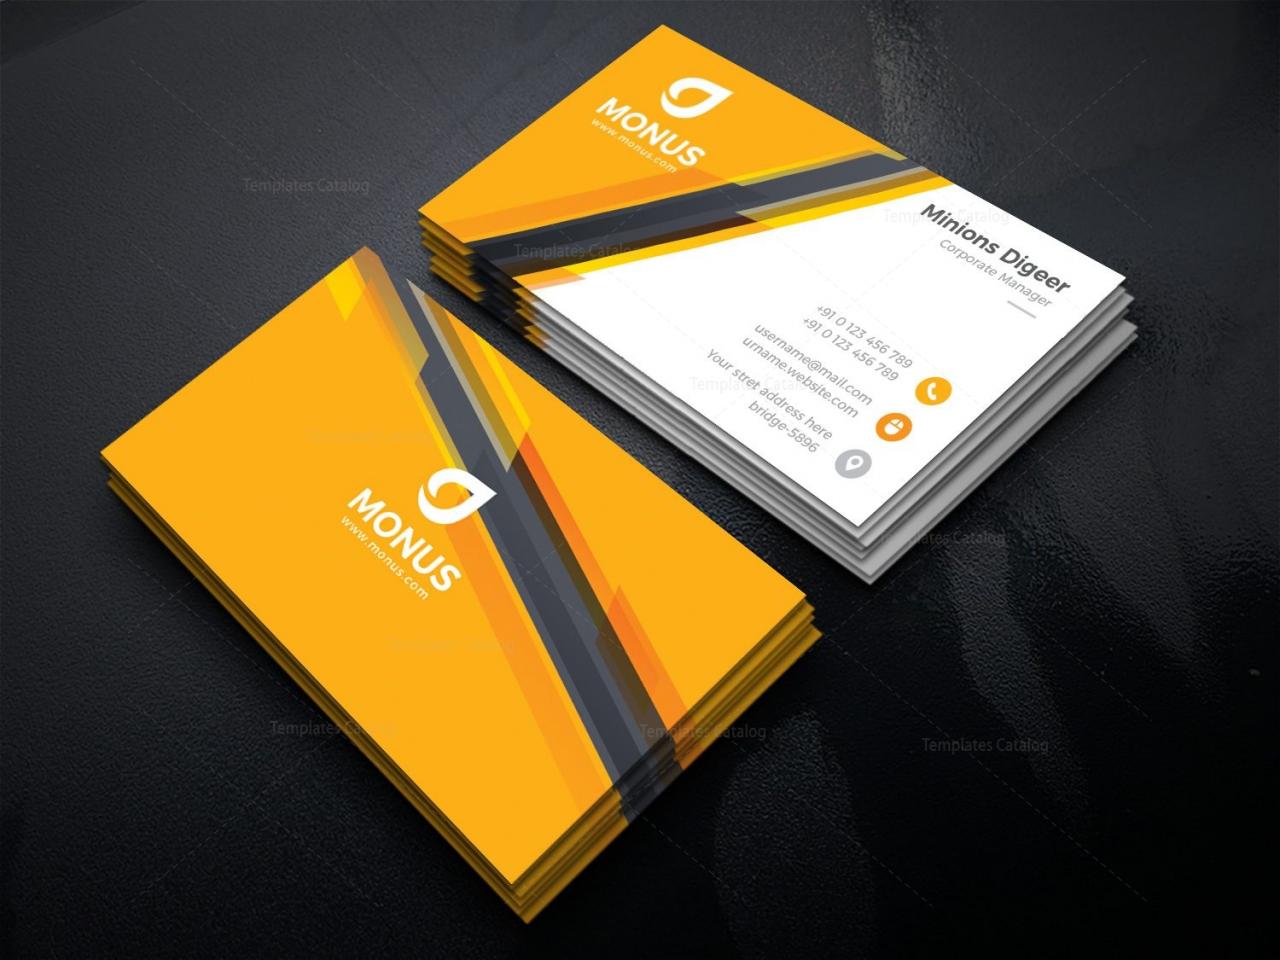 Awesome Corporate Business Card Design Template - Graphic Prime ...